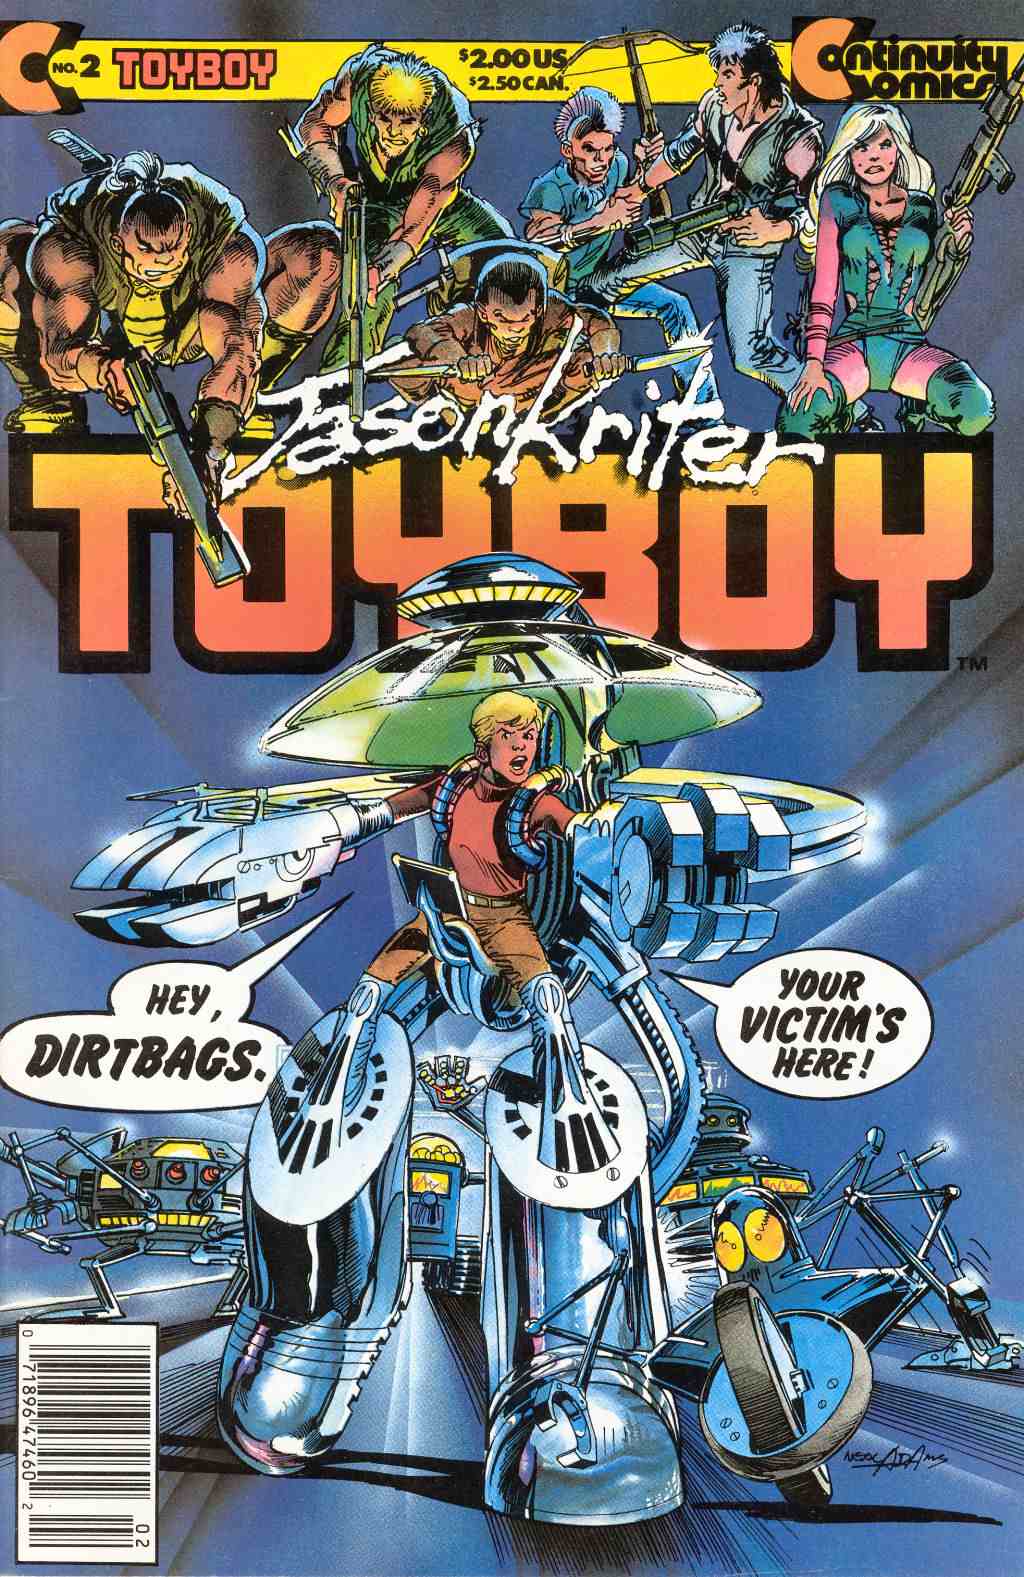 Read online Toyboy comic -  Issue #2 - 1